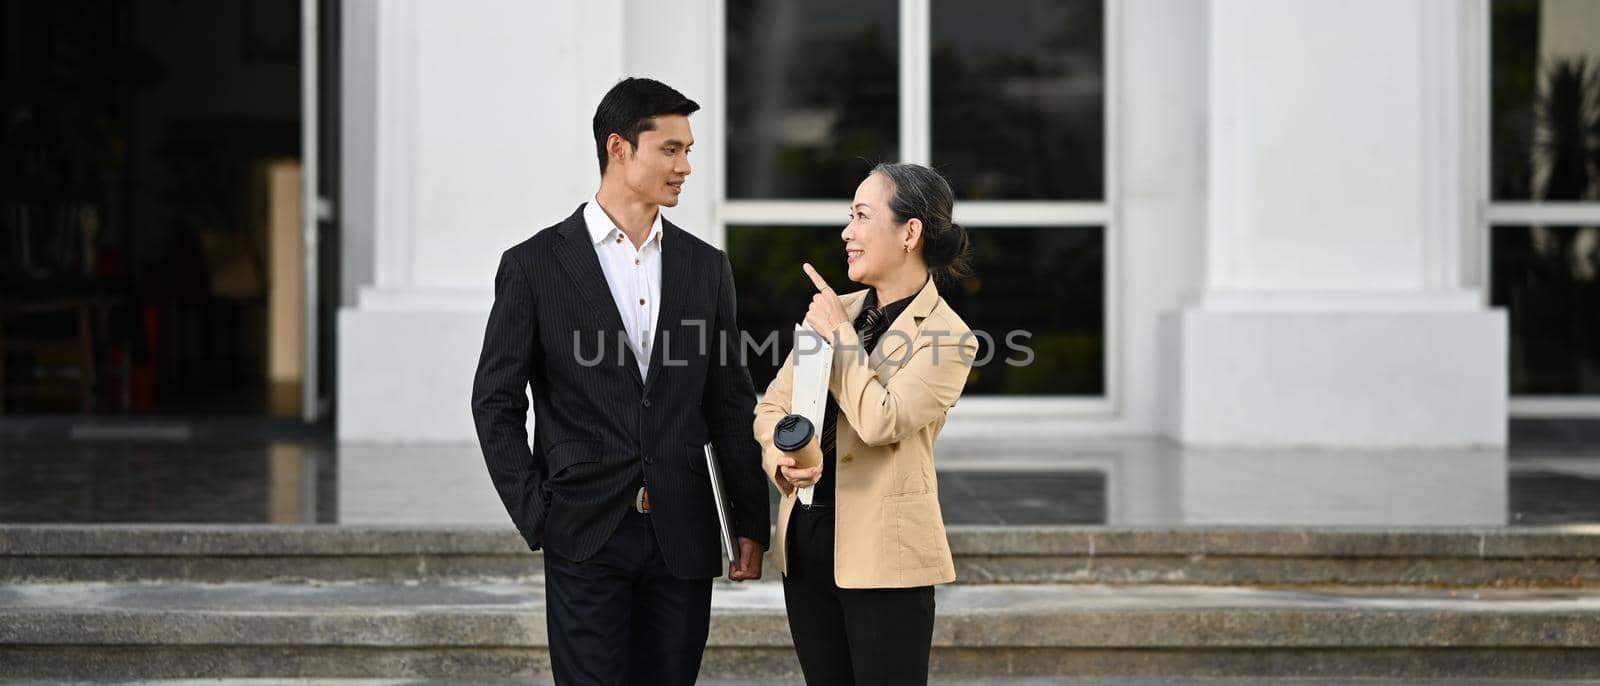 Two professional business people wearing formal suits talking and walking outside modern office building.